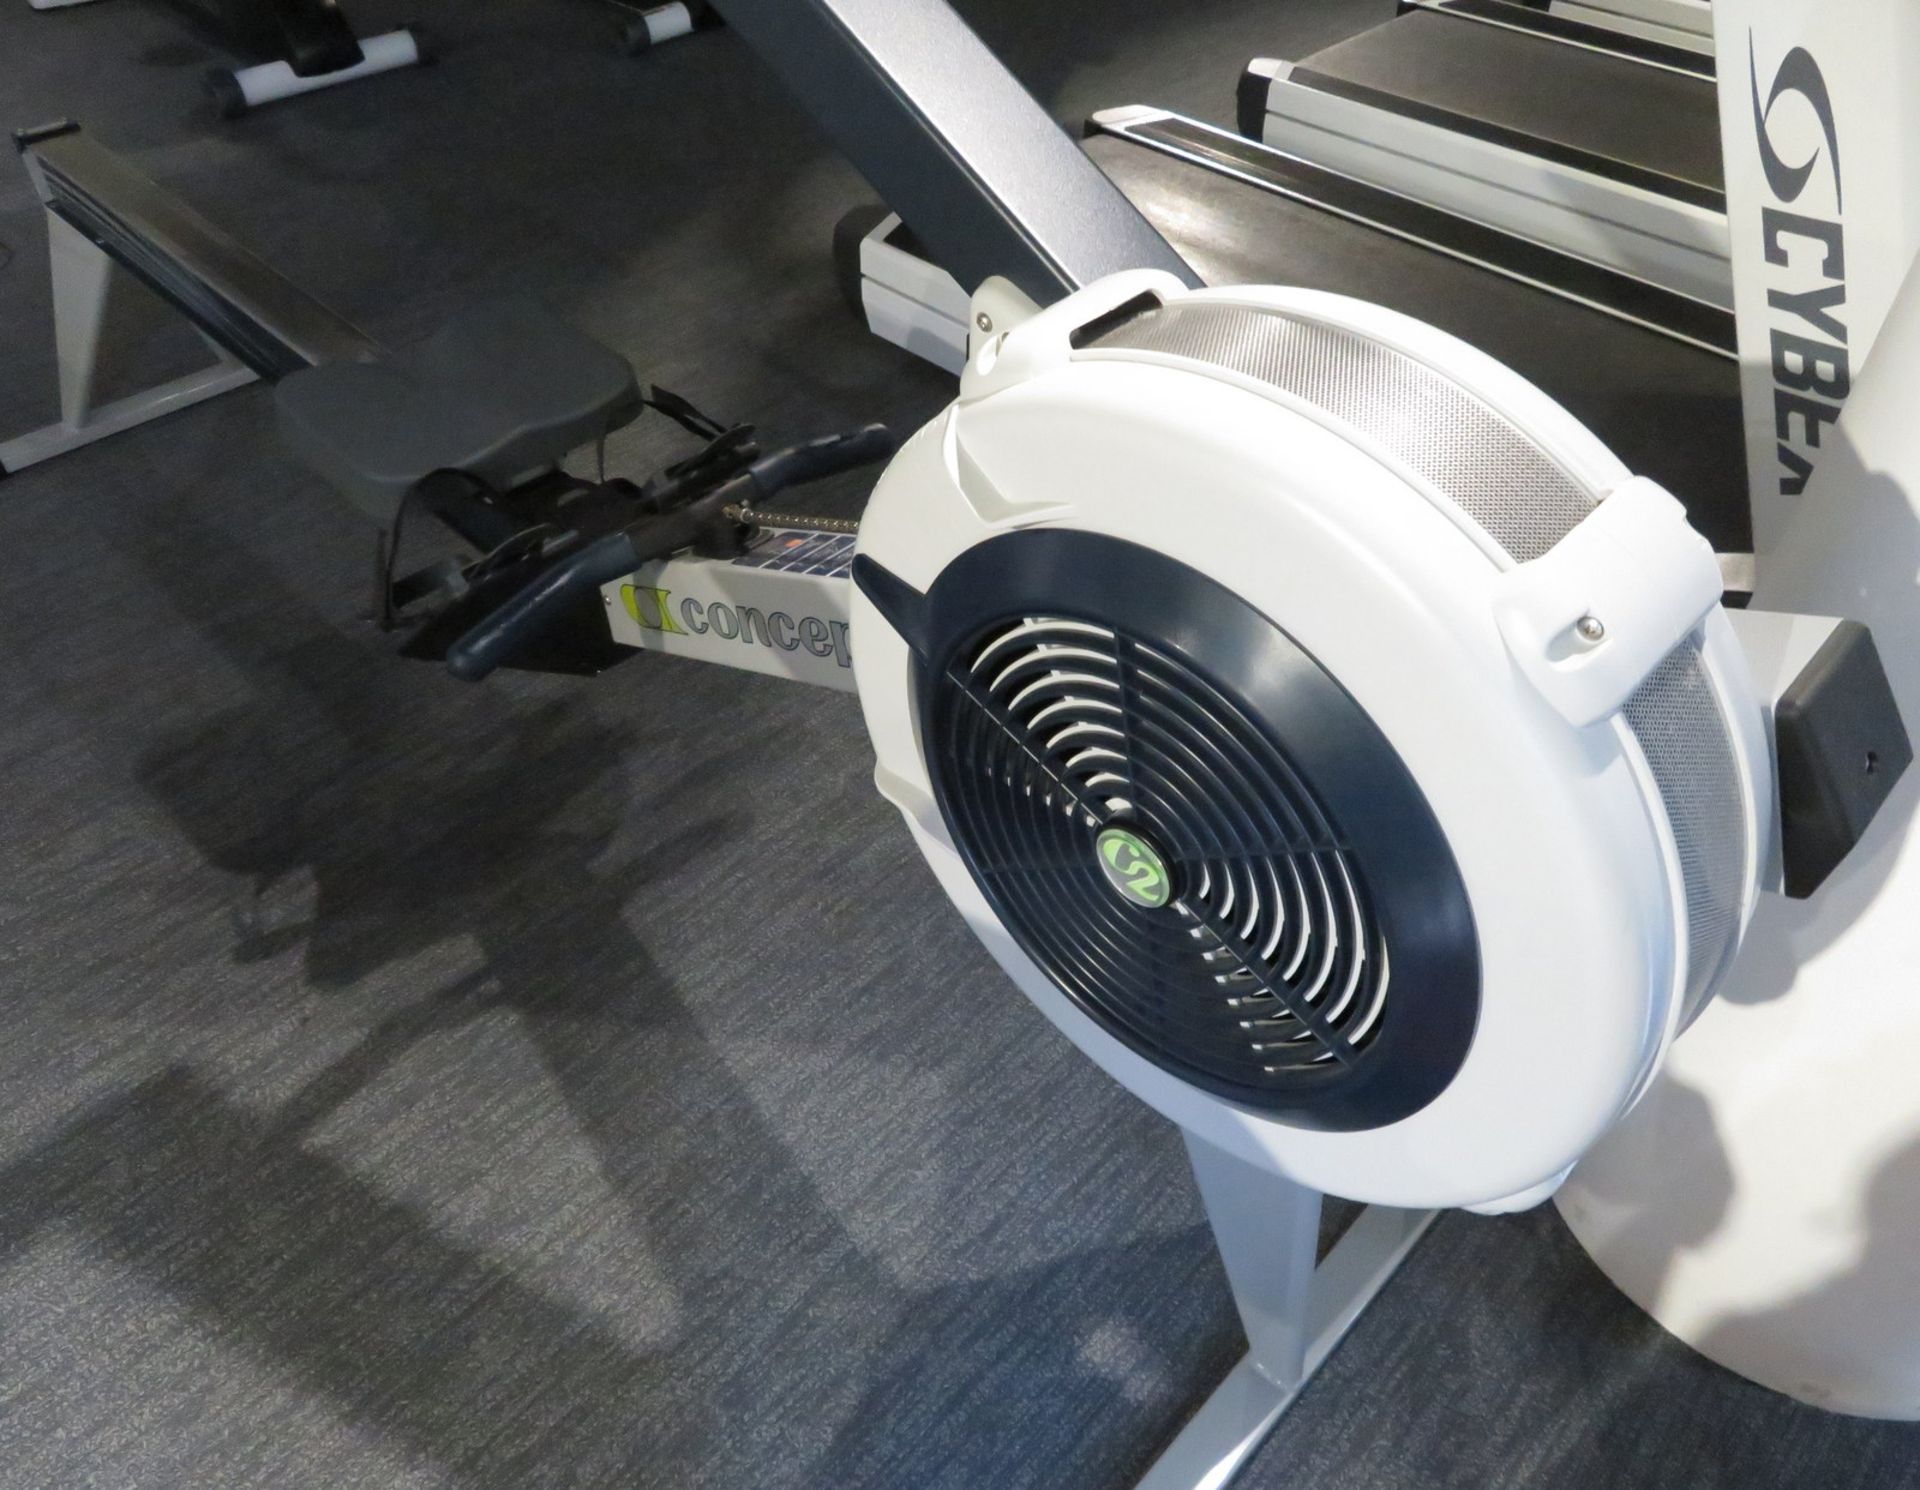 Concept 2 Indoor Rower Model E, Complete With PM5 Display Console. - Image 4 of 8